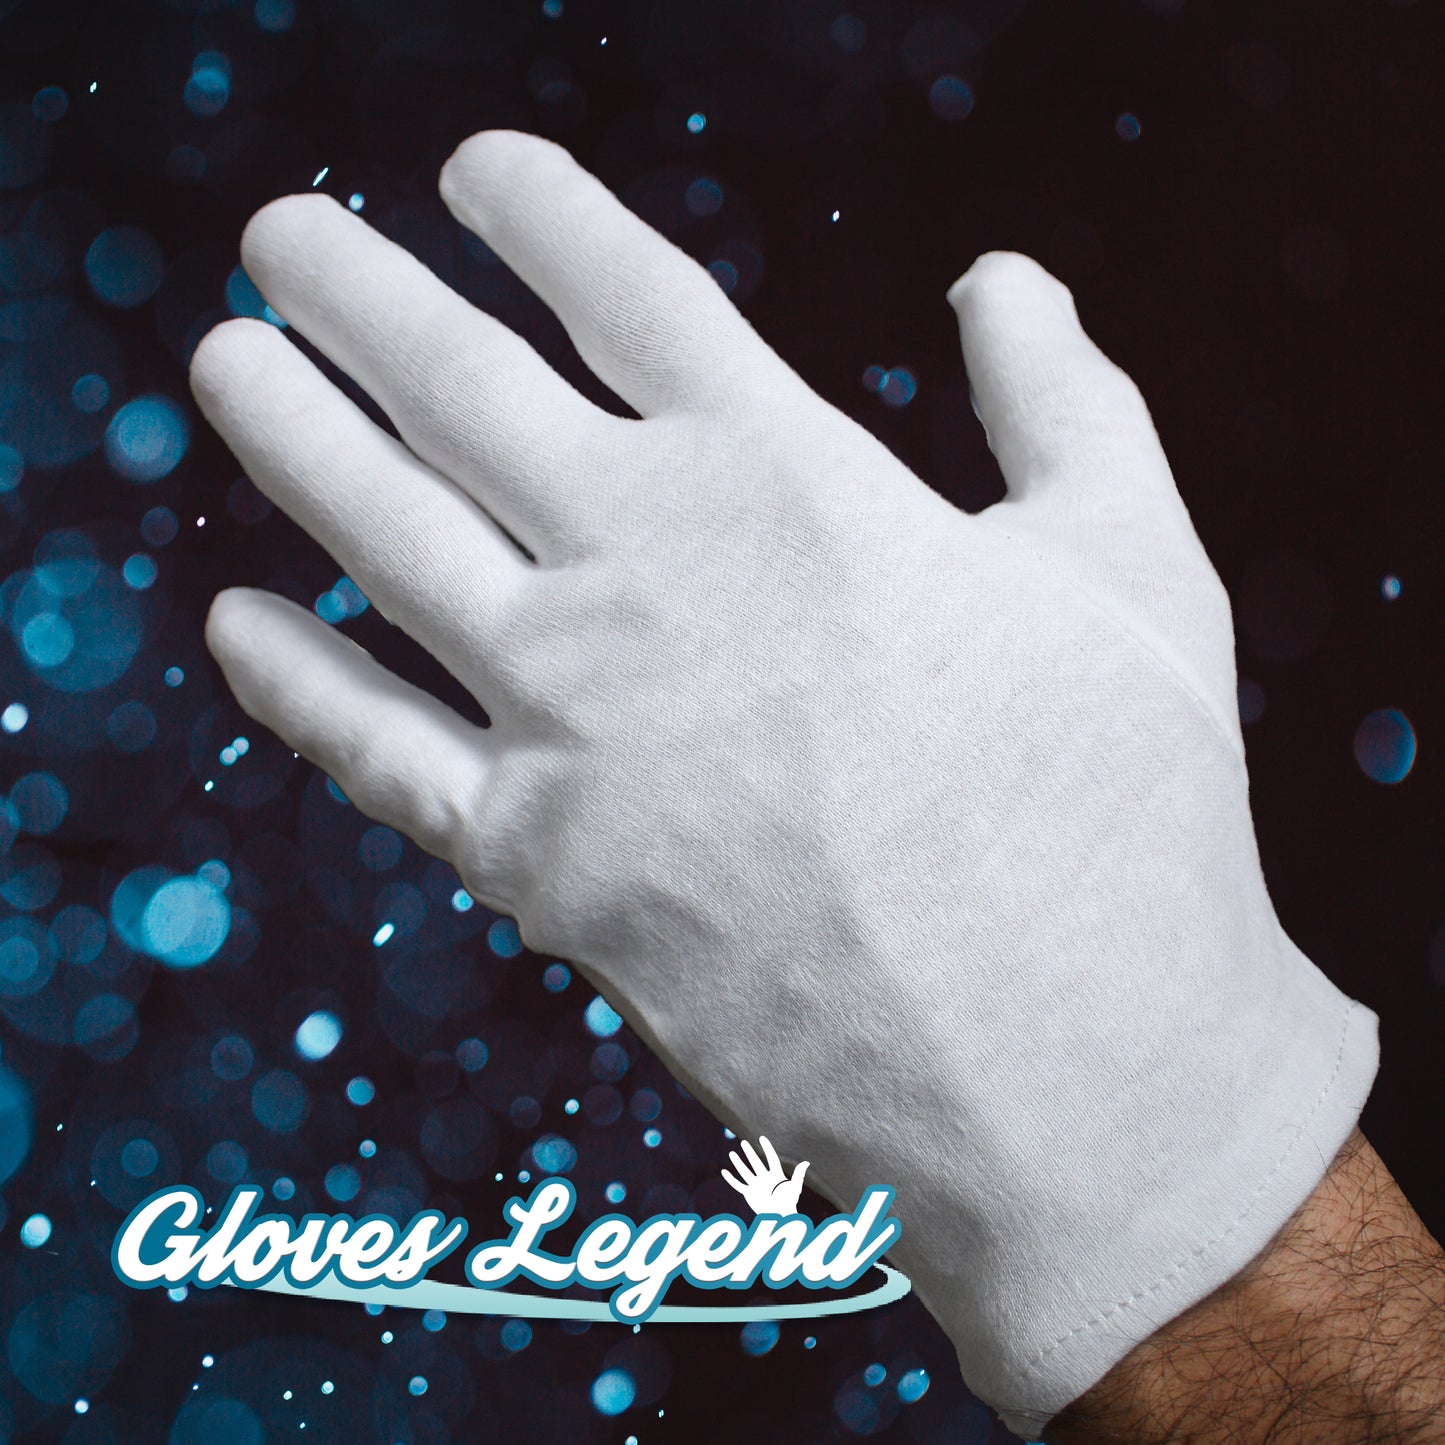 Gloves Legend White Cotton Moisturizing Parade Jewelry Silver Costumes Inspection Gloves